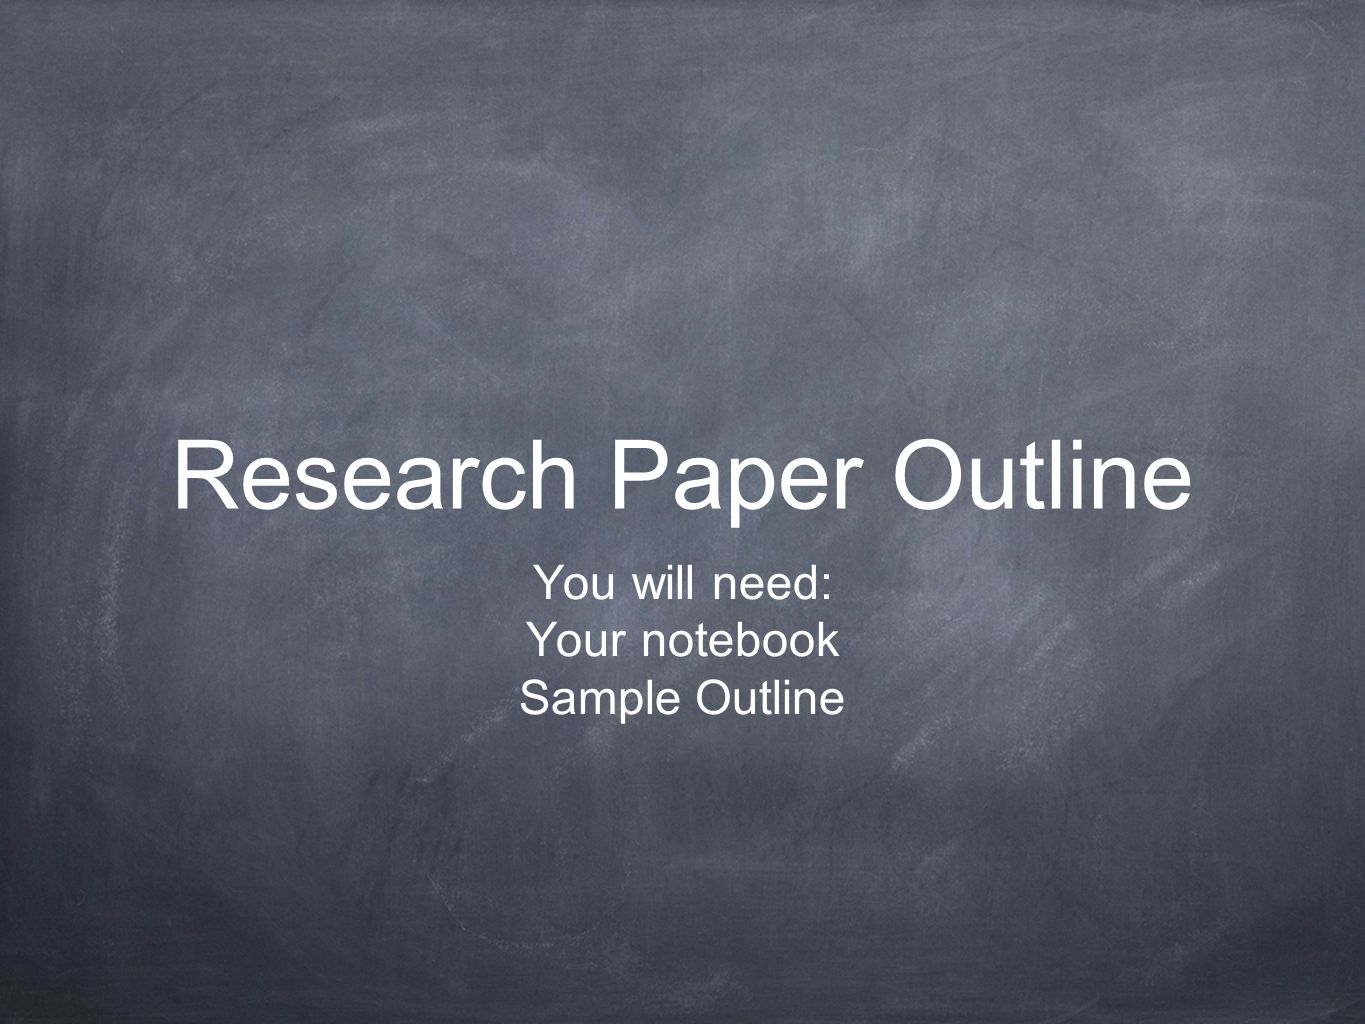 Research Paper Outline You will need: Your notebook Sample Outline